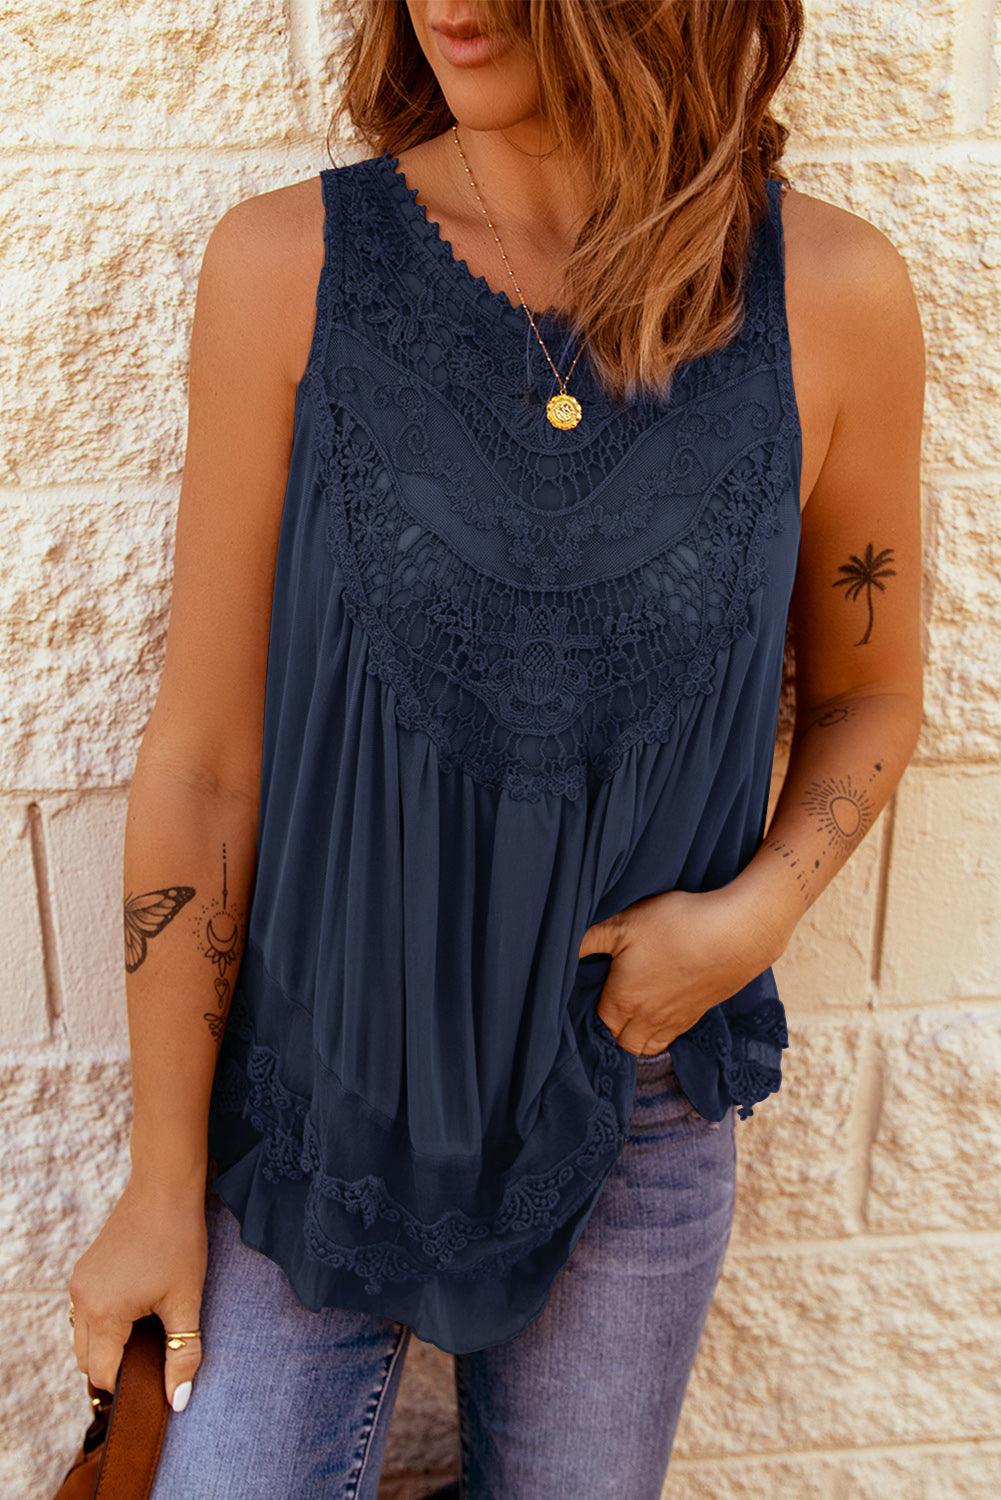 Lace Detail Buttons Back Sleeveless Top - L & M Kee, LLC